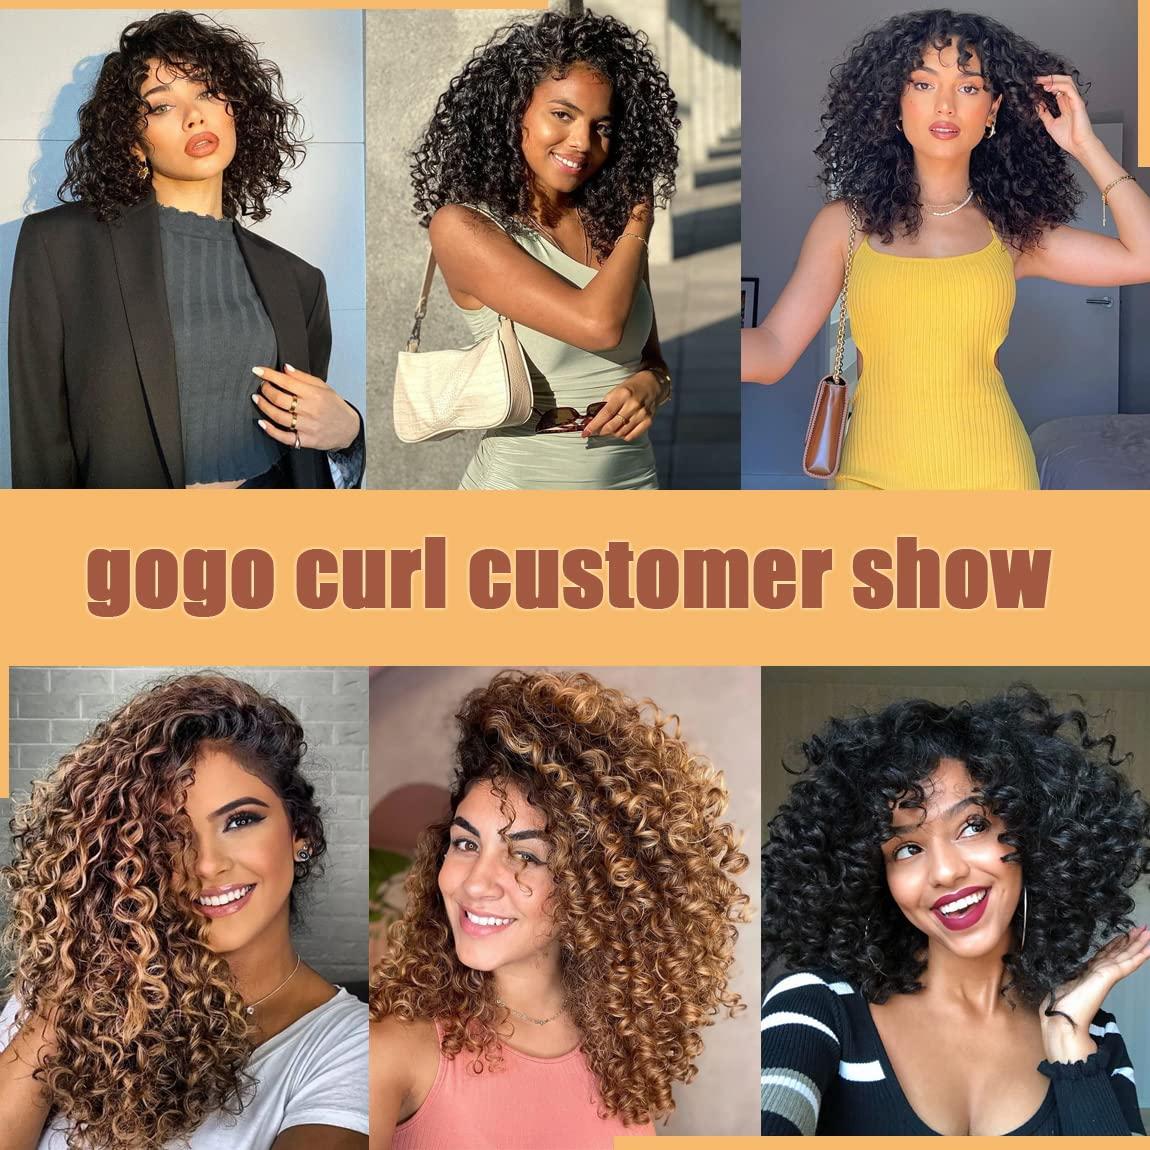  GoGo Curl Curly Crochet Hair for Women Water Wave